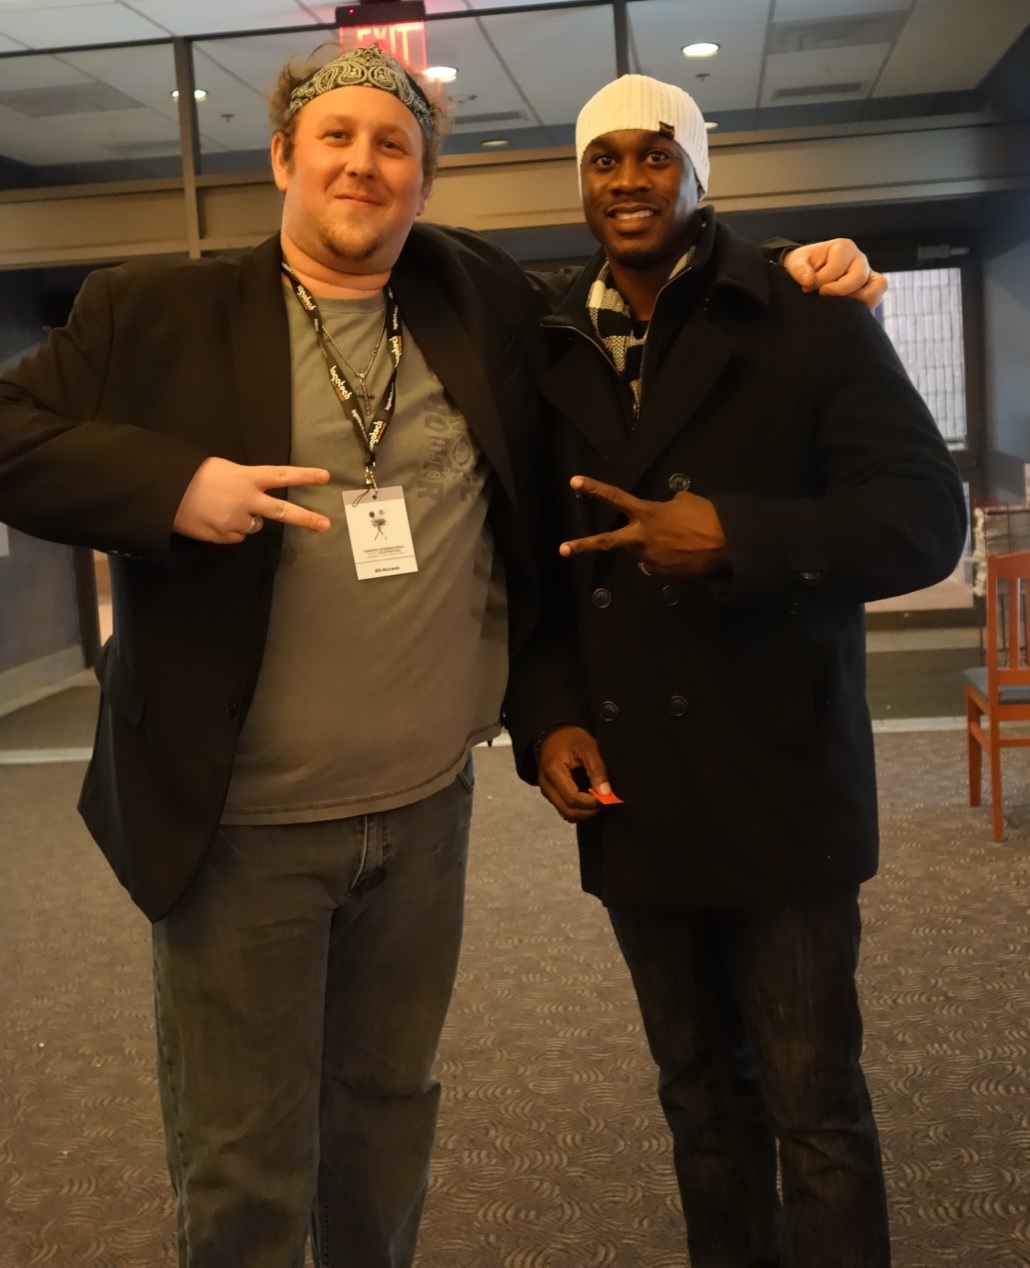 Actor/Writer/Director - James McDougall and Actor Michael A. Amos at the 2014 Toronto International Short Film Fest